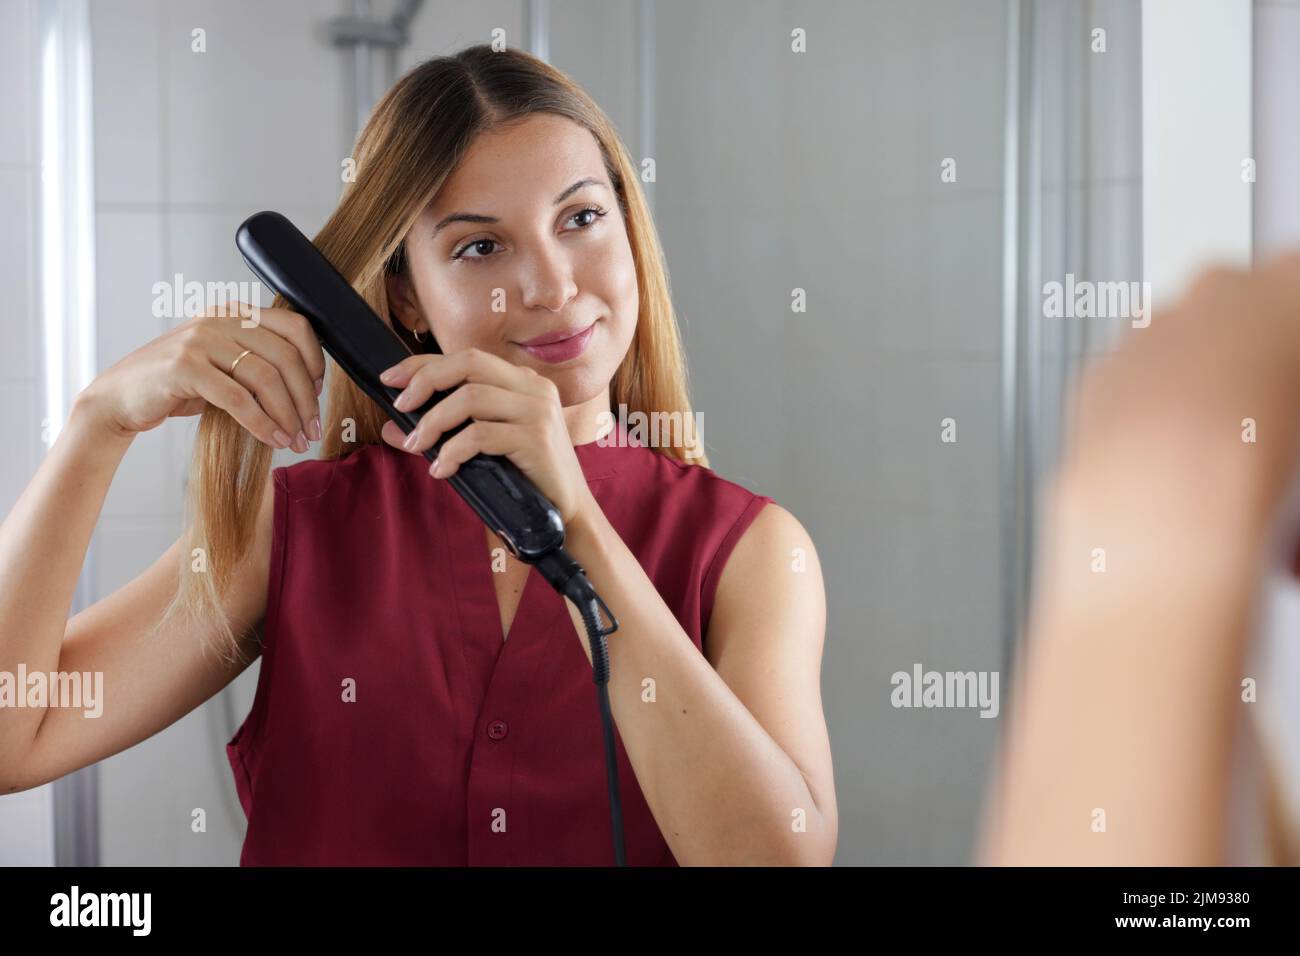 Beautiful young woman using steam straightener to style hair at the mirror on bathroom Stock Photo